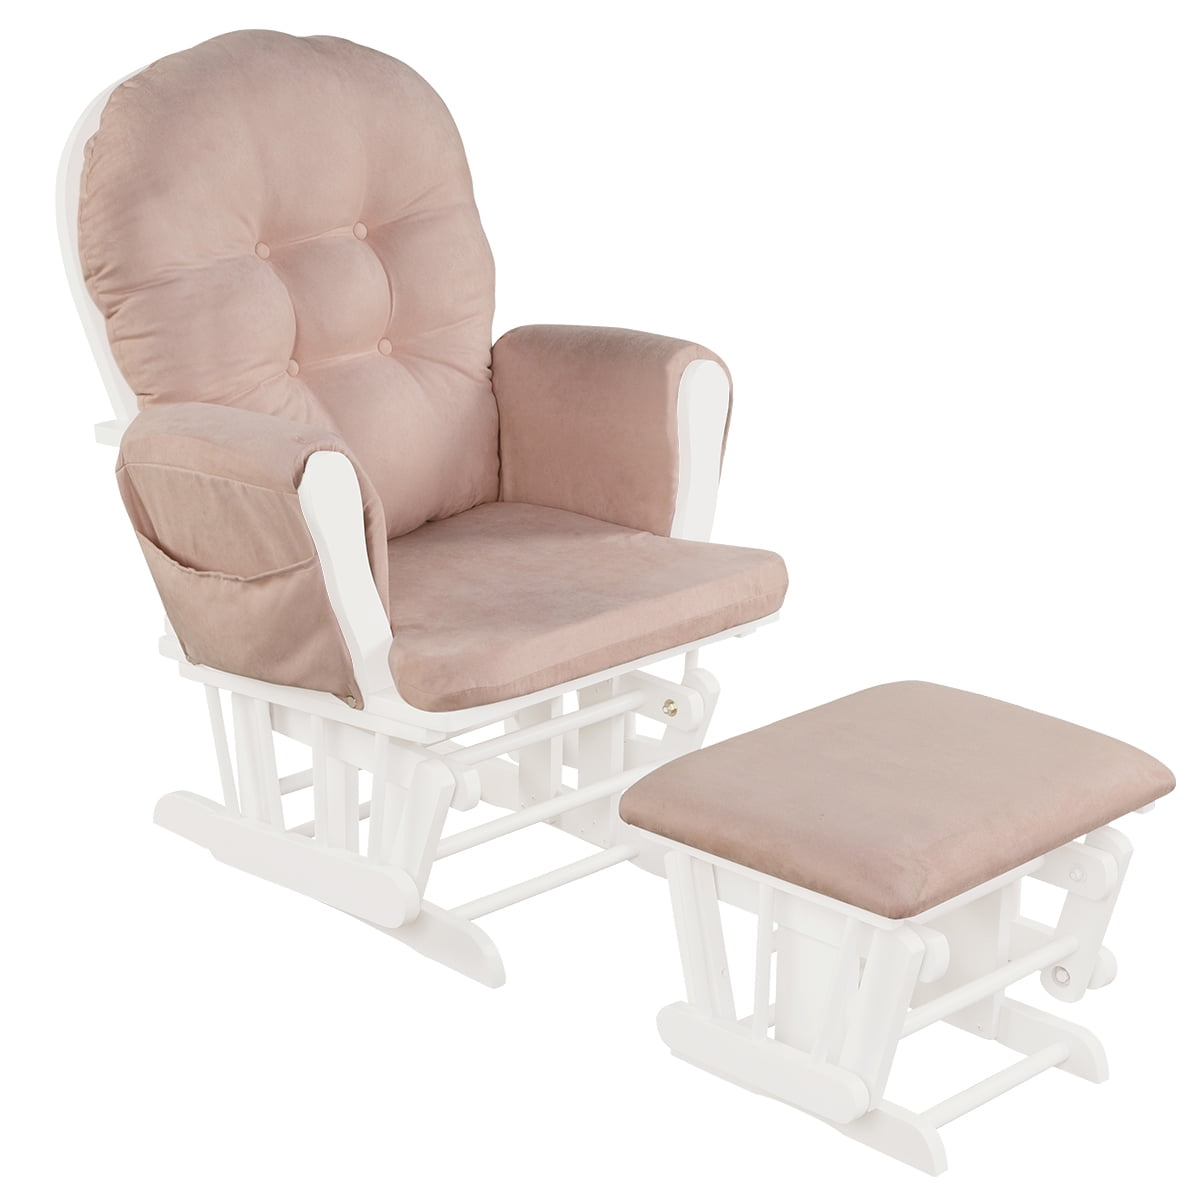  READY ROCKER Portable Rocking-Chair - Ideal for Nursery  Furniture, Home-Office-Chair-Outdoor-Use, Travel for Moms, Dads, Seniors -  Replaces Need for Glider - Baby Registry-Shower Gift